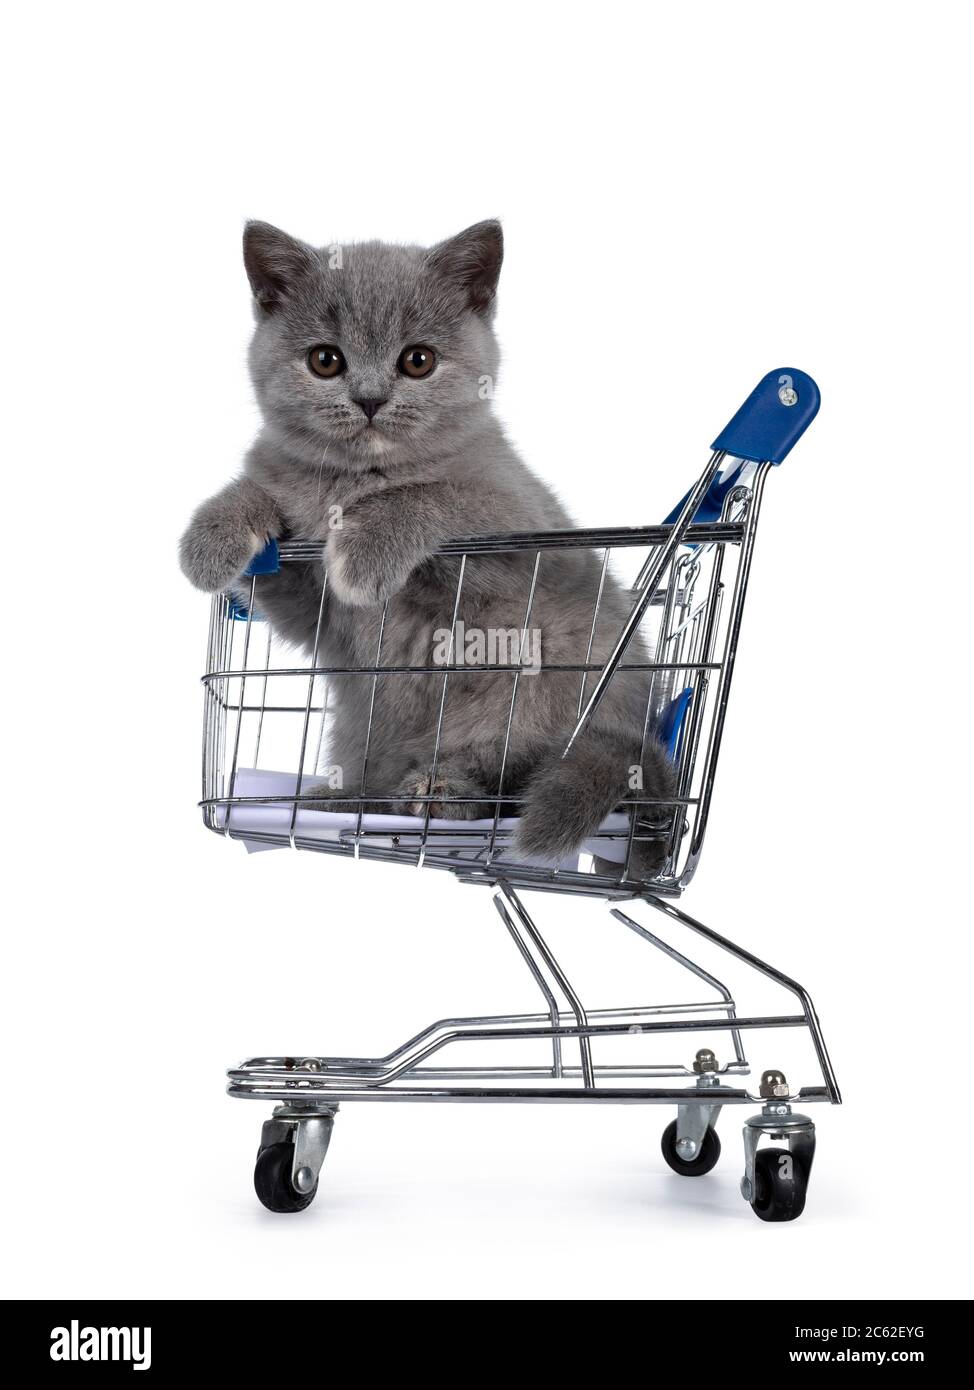 Cute small blue tortie British Shorthair cat kitten, sitting in mini shopping cart. Paws on edge and looking towards camera with brown eyes. Isolated Stock Photo